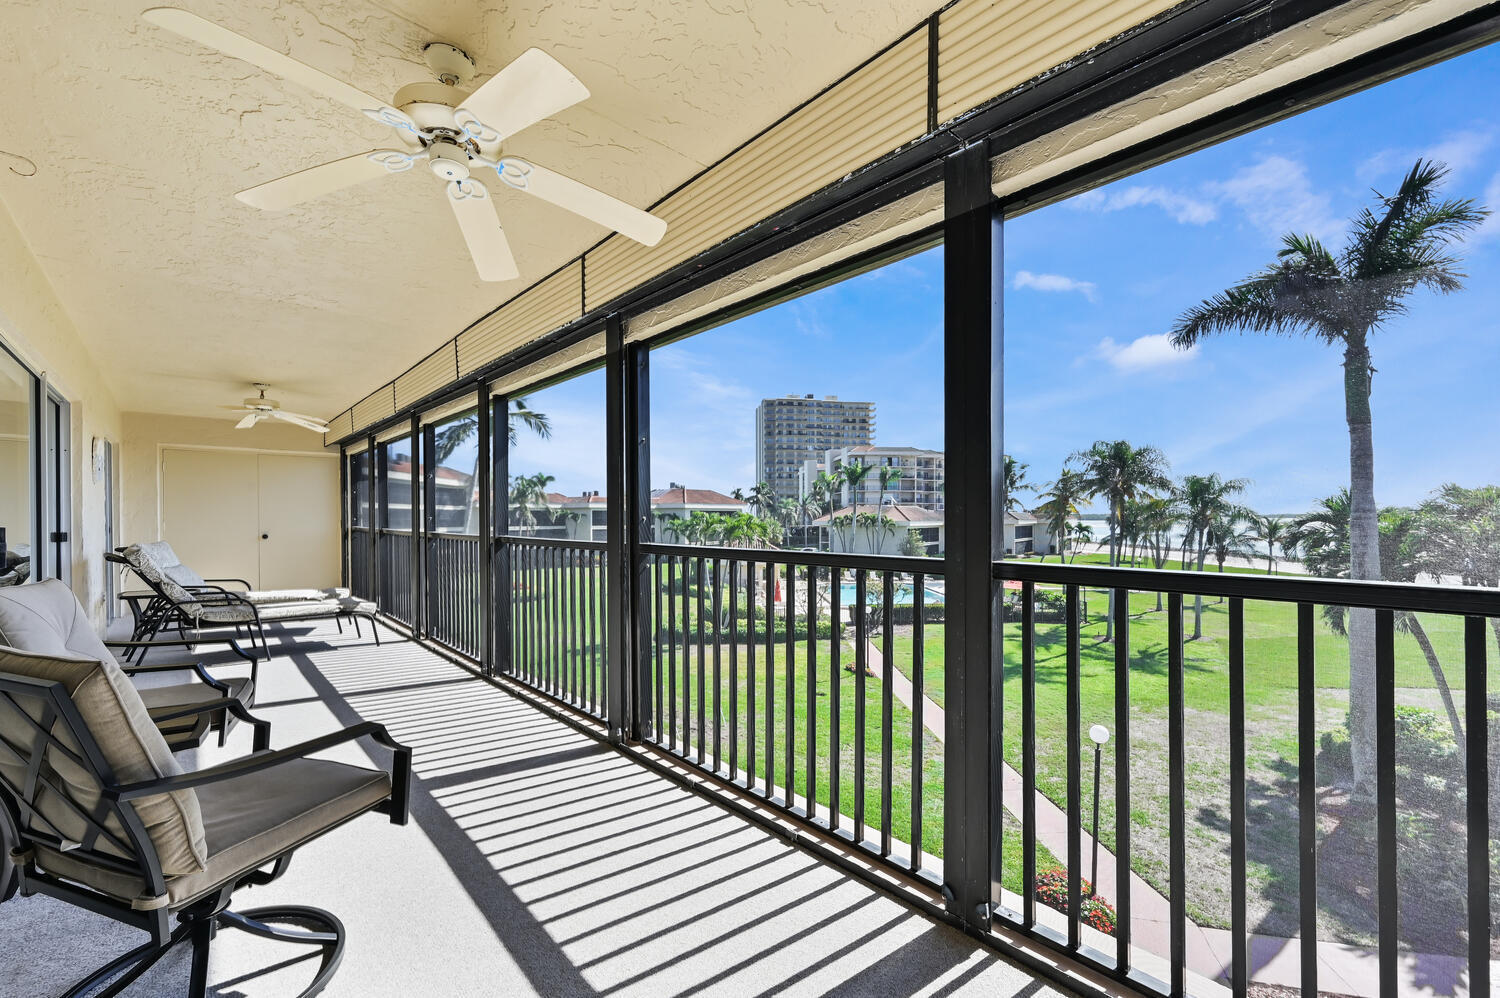 1080 S Collier Boulevard Unit 301, Marco Island, Florida, 34145, United States, 2 Bedrooms Bedrooms, ,2 BathroomsBathrooms,Residential,For Sale,1080 s collier BLVD unit 301,1434226